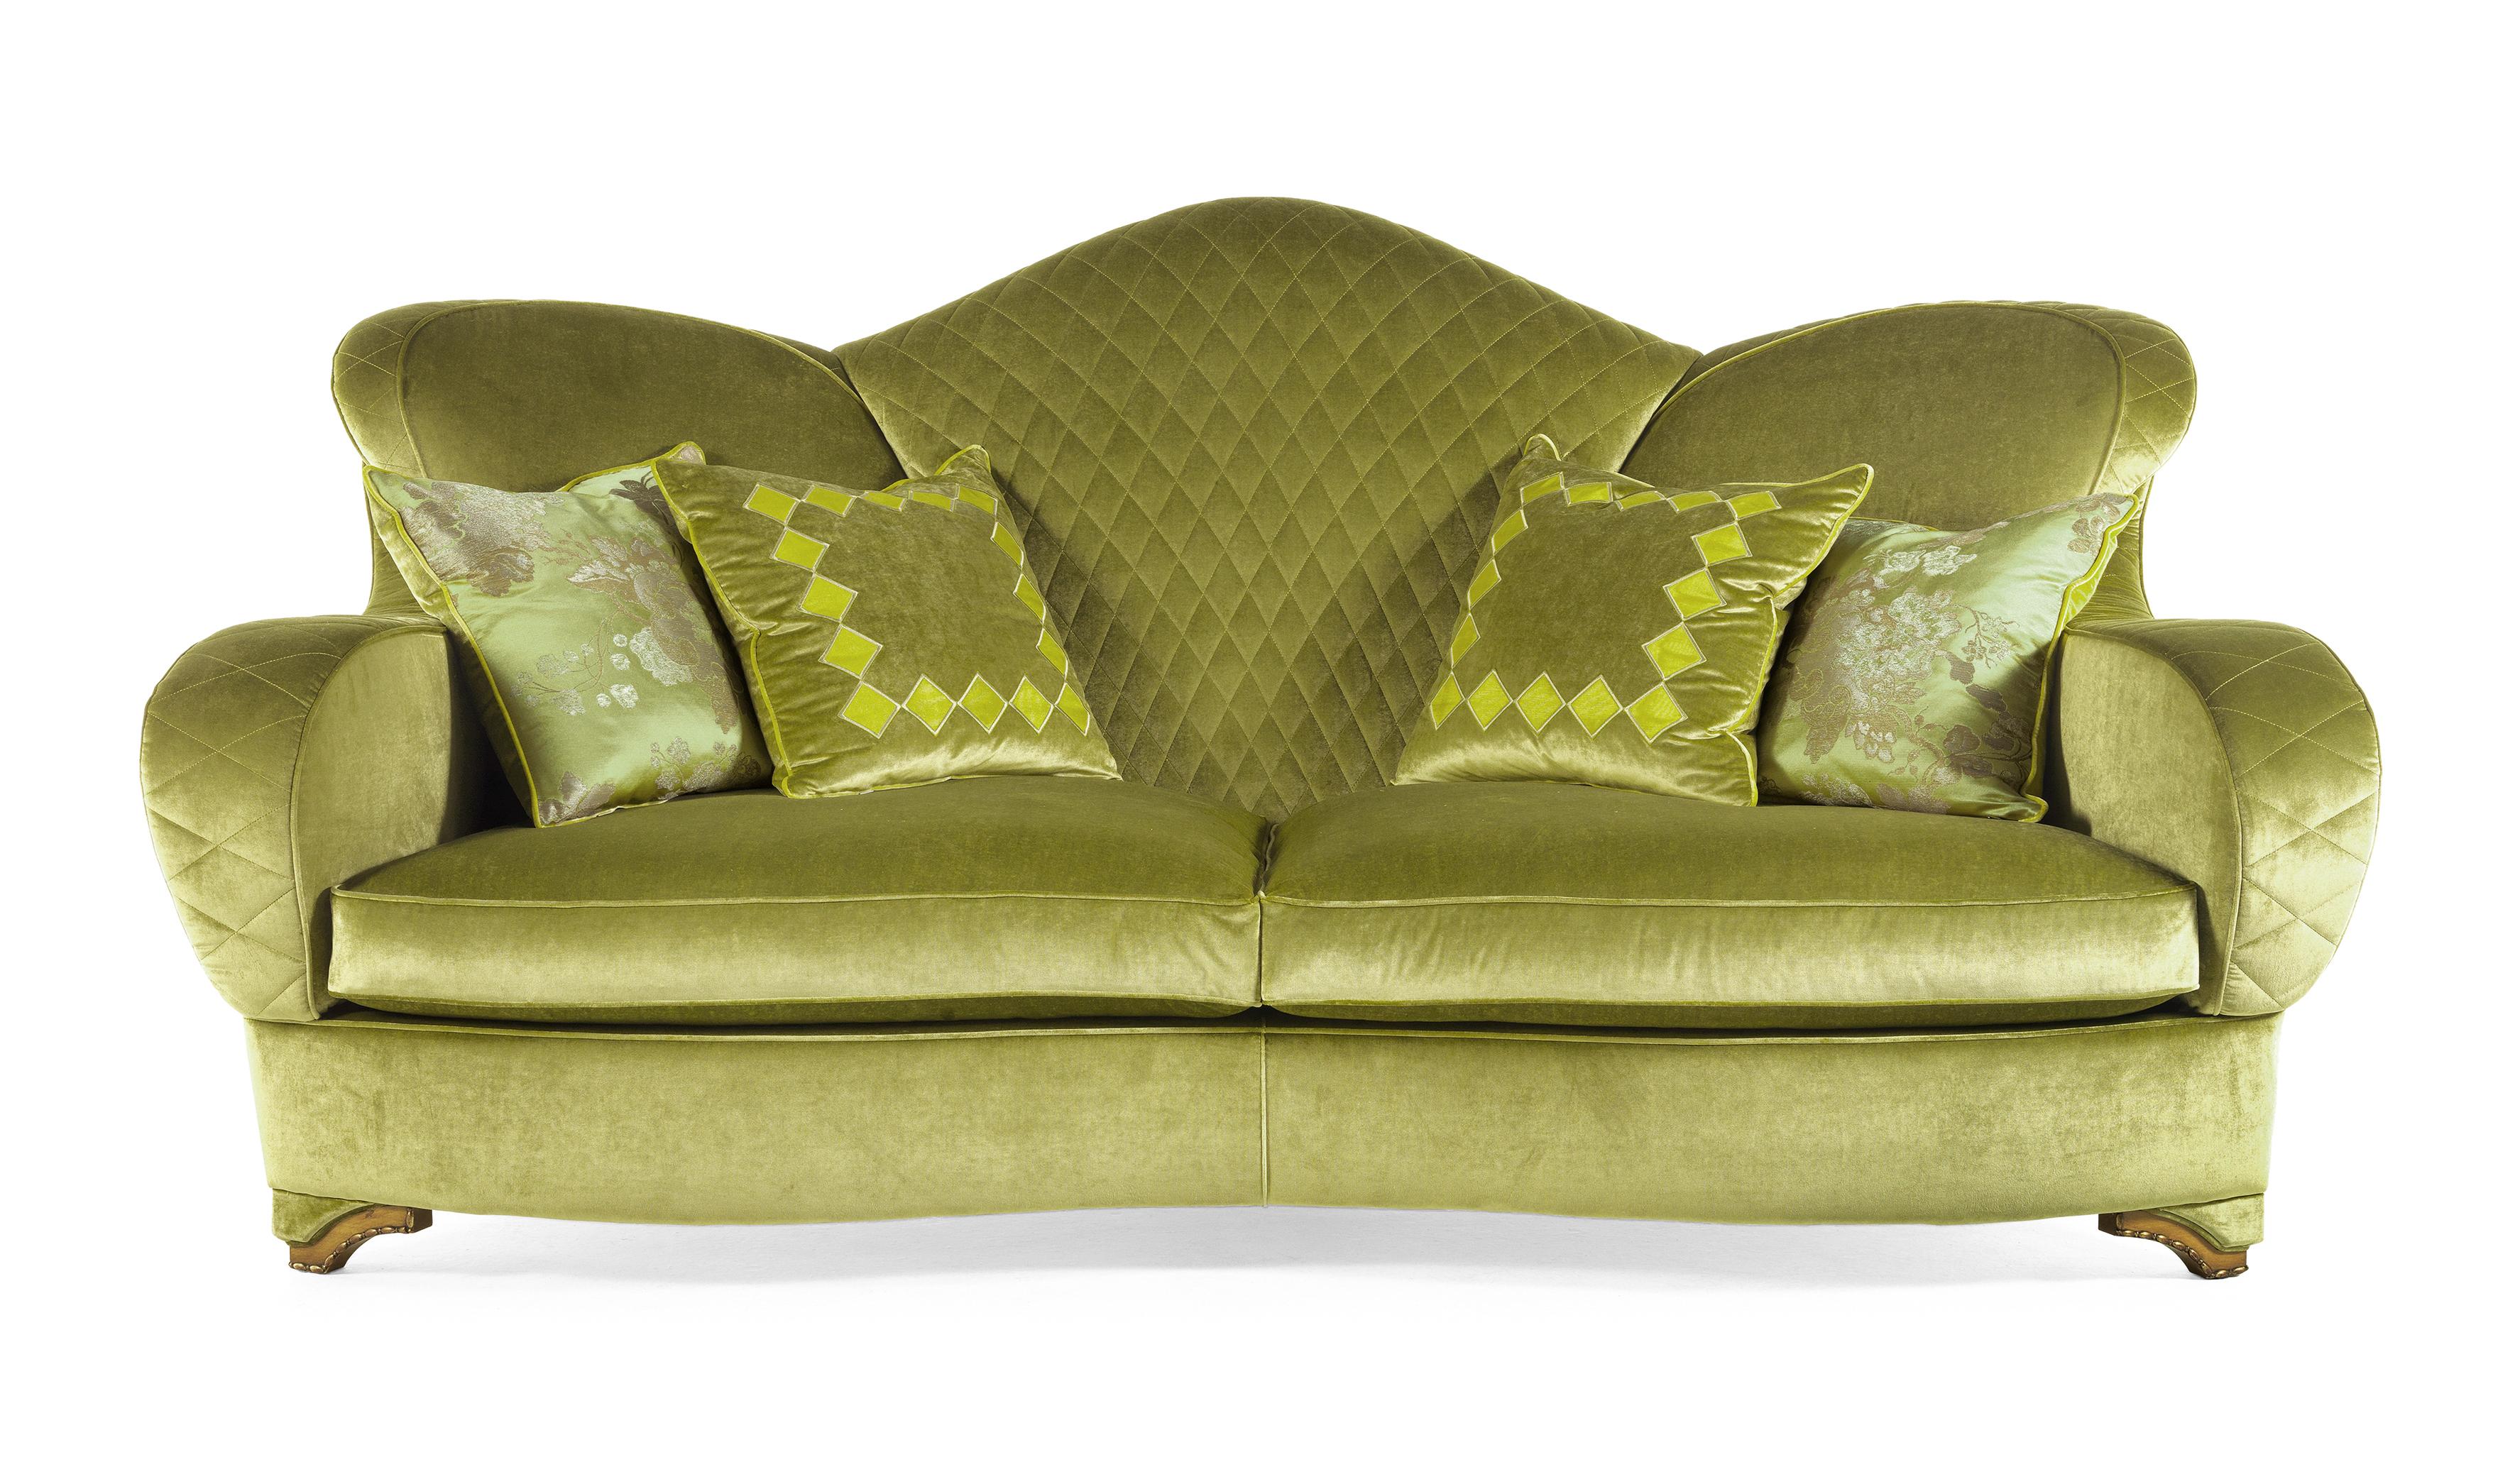 Classic three-seat sofa with sinous and unexpected shape, the ENEA sofa is upholstered in green velvet and the fresh and innovative design is enriched by a geometric embroidery on the backrest and armrests. Standard components of absolute quality